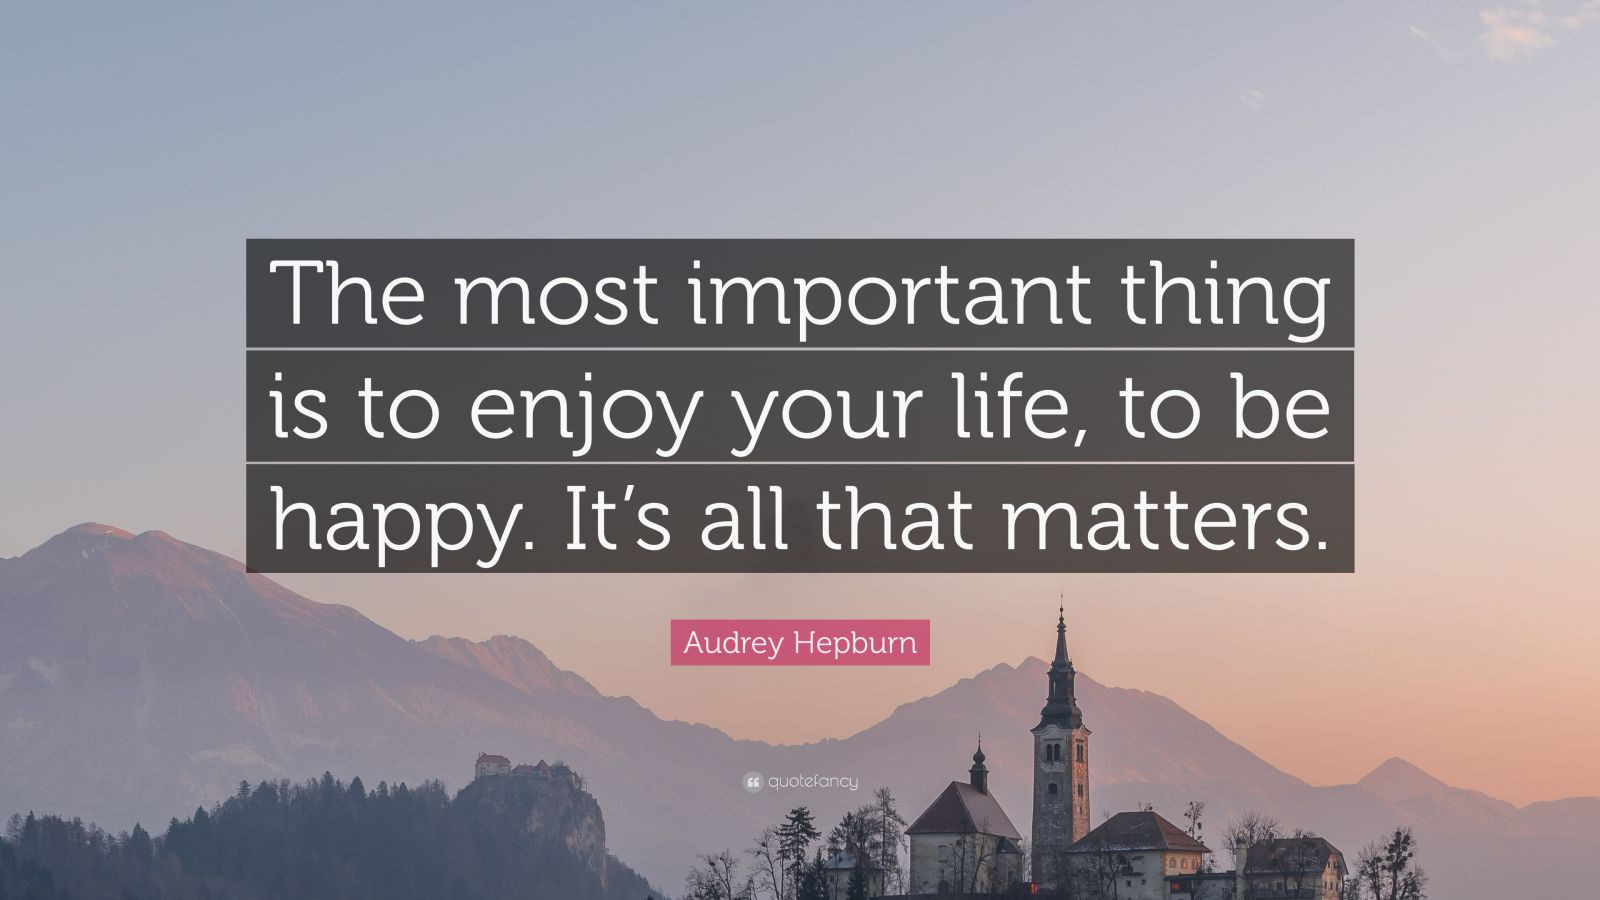 Enjoy Your Life Quote
 Audrey Hepburn Quote “The most important thing is to